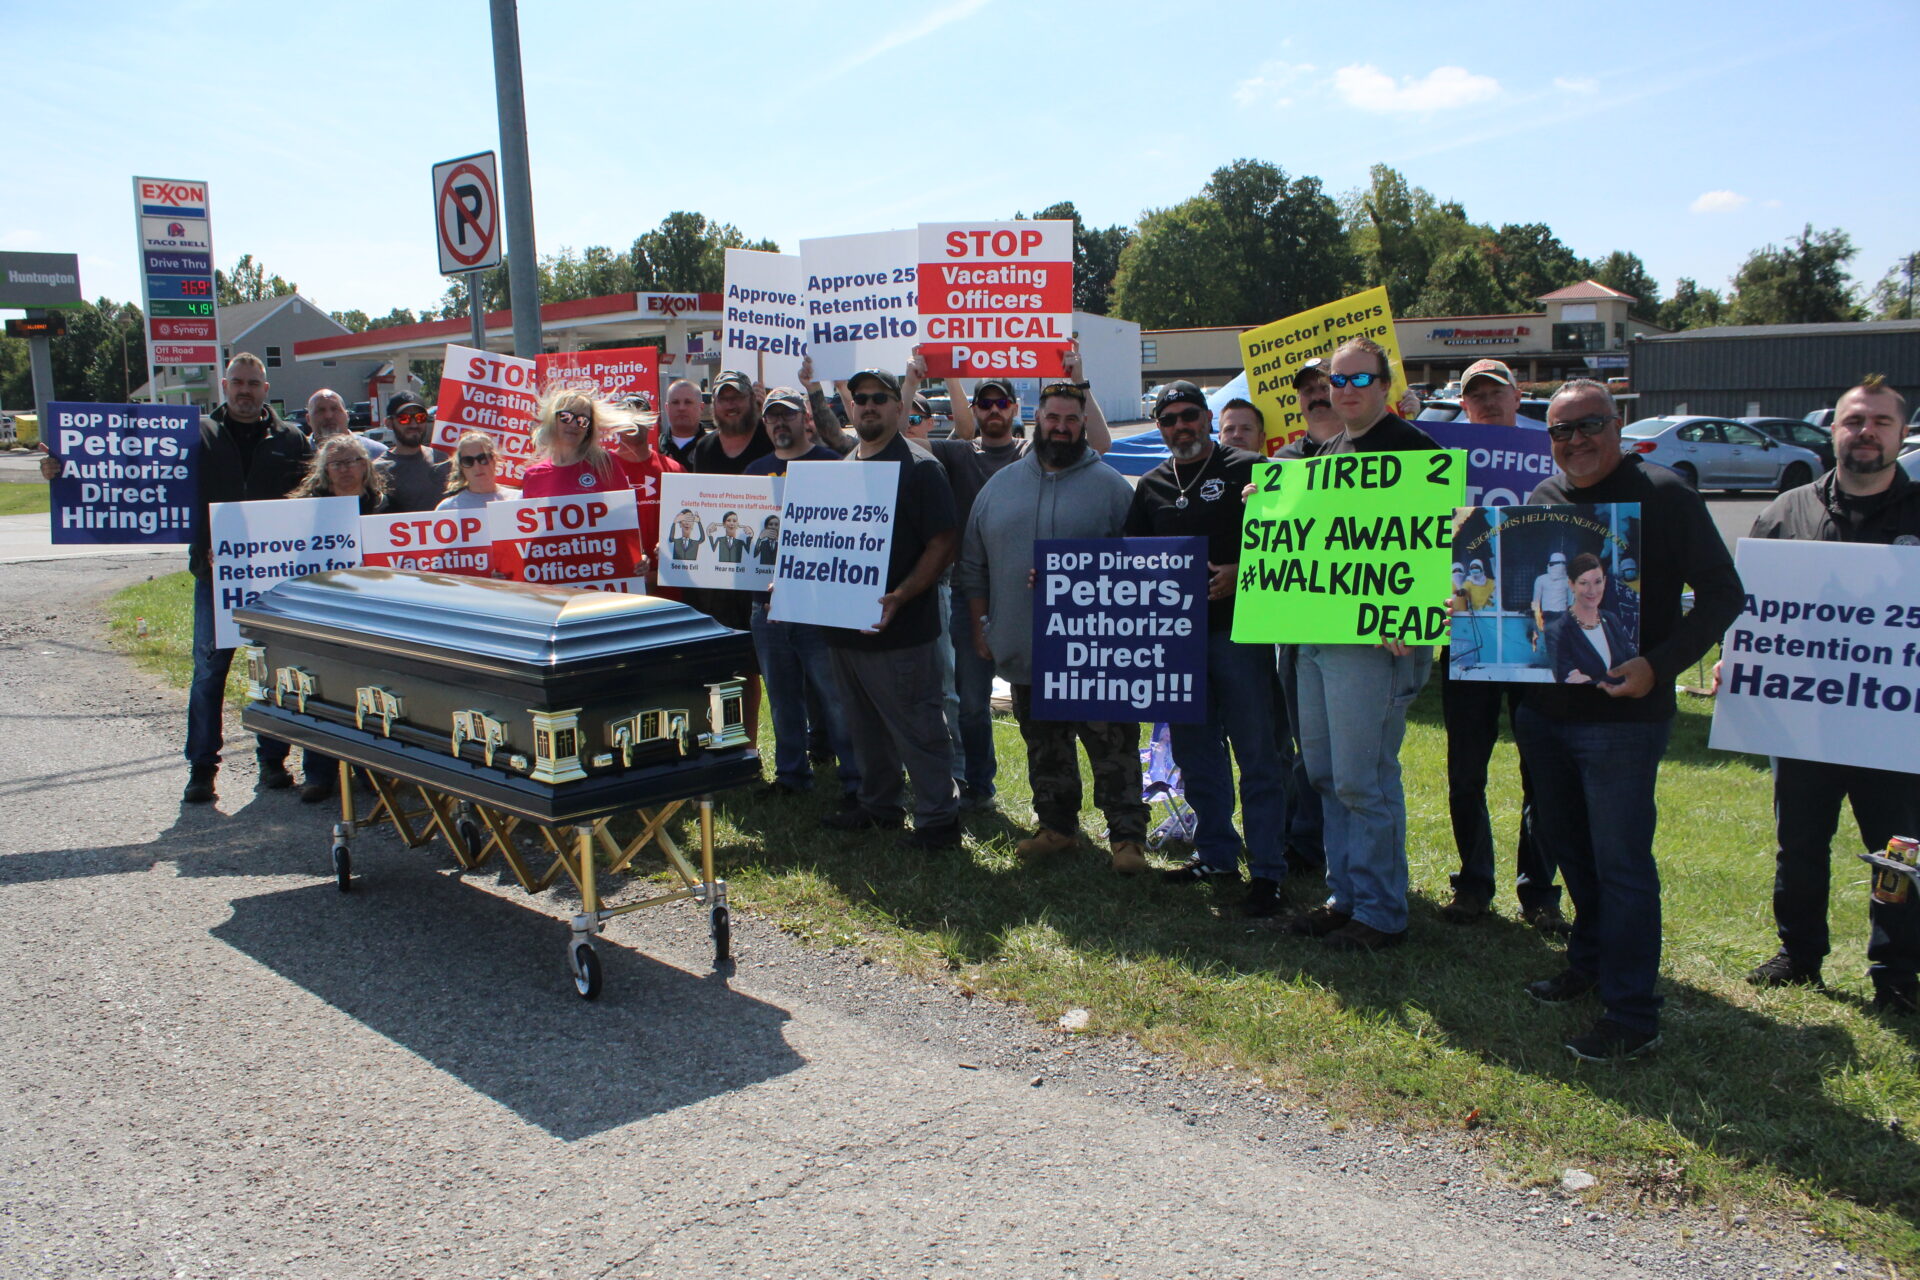 A group of people stand on the side of the road behind a casket. Many hold signs, some of which read "BOP Director Peters, Authorize Direct Hiring!!!" and "STOP Vacating Officers CRITICAL Posts" and "2 Tired 2 Stay Awake #WalkingDead"